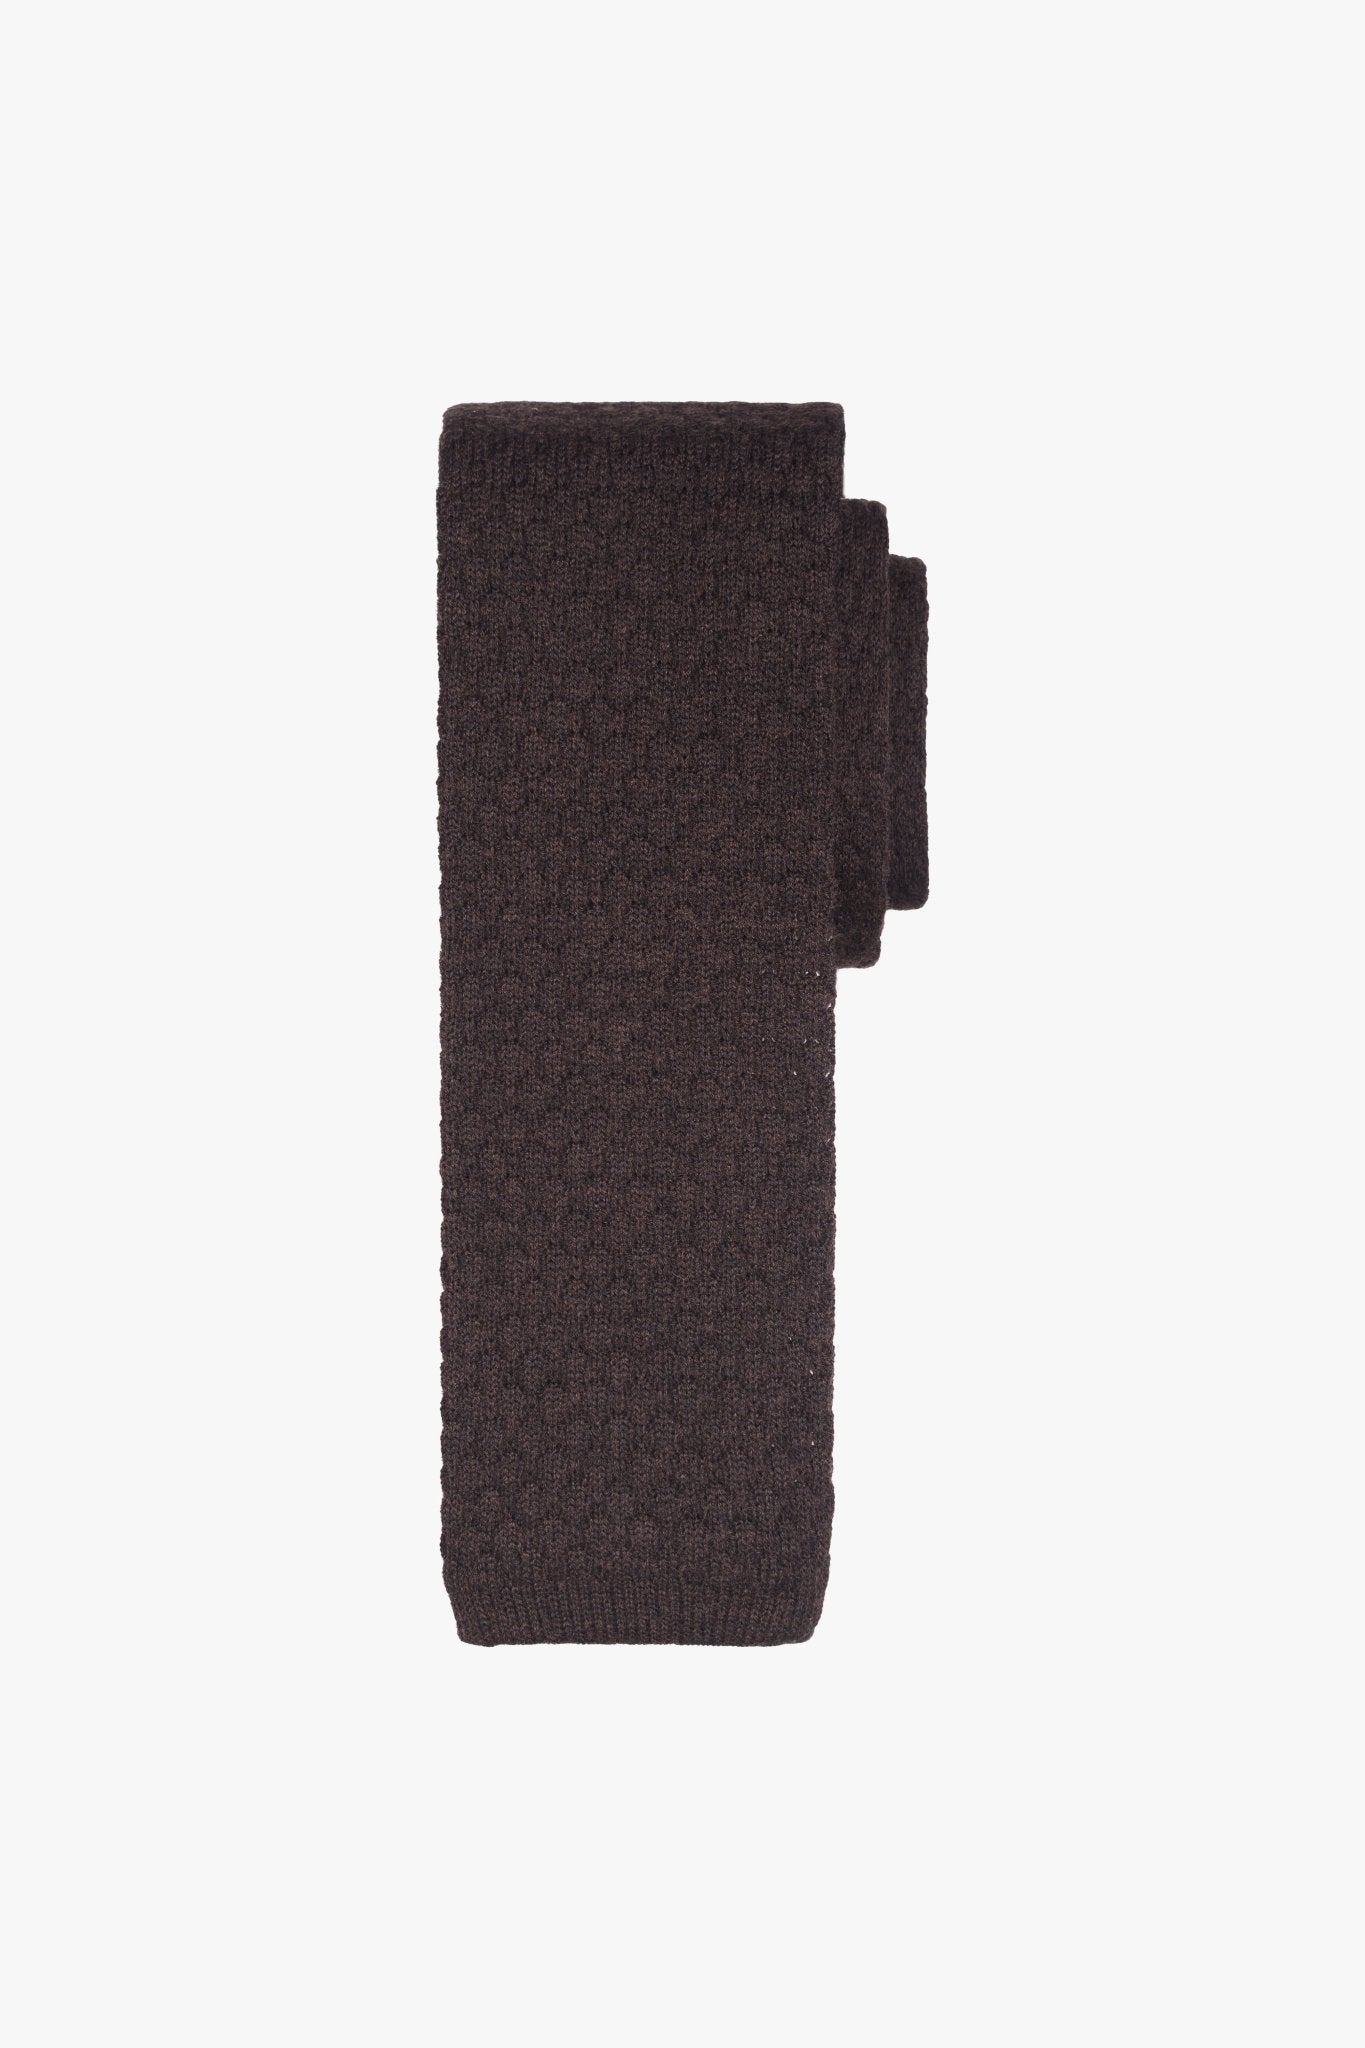 Brown Knitted Tie - My Suited Life